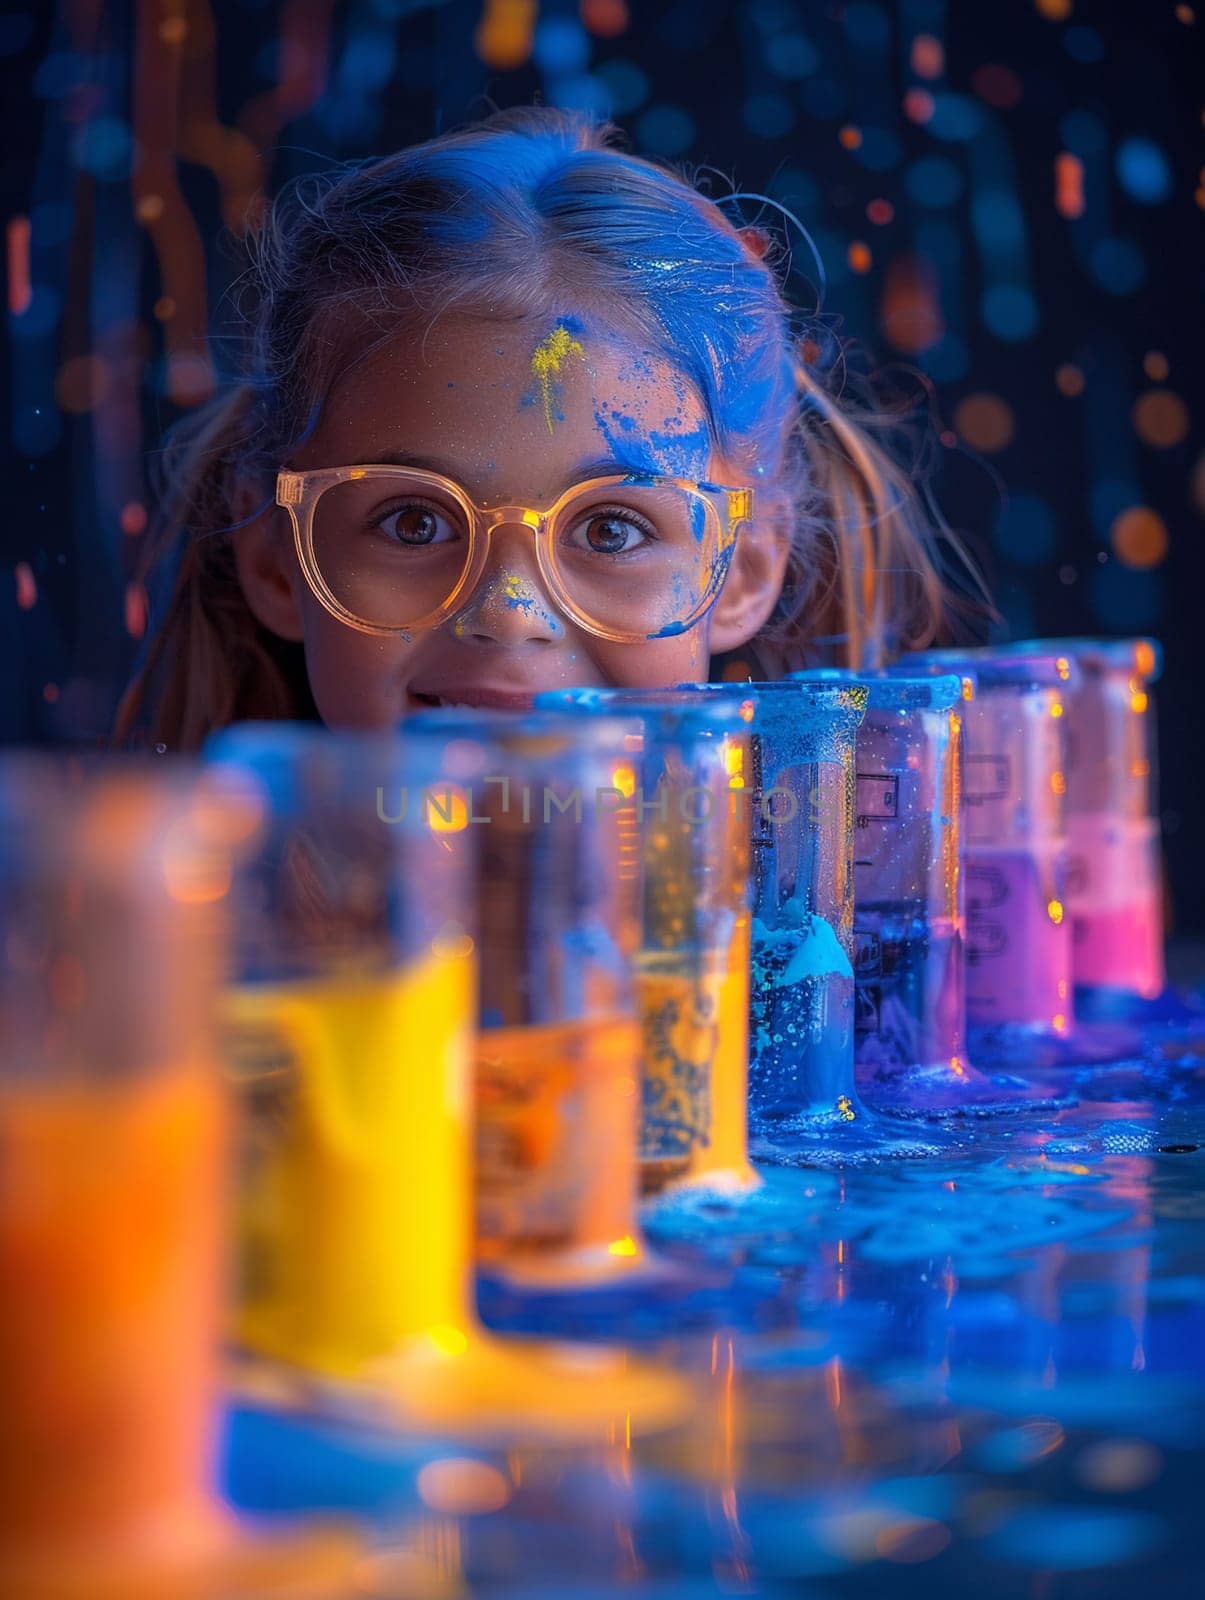 Experiment with colorful reactions in a science fair, representing curiosity and learning.